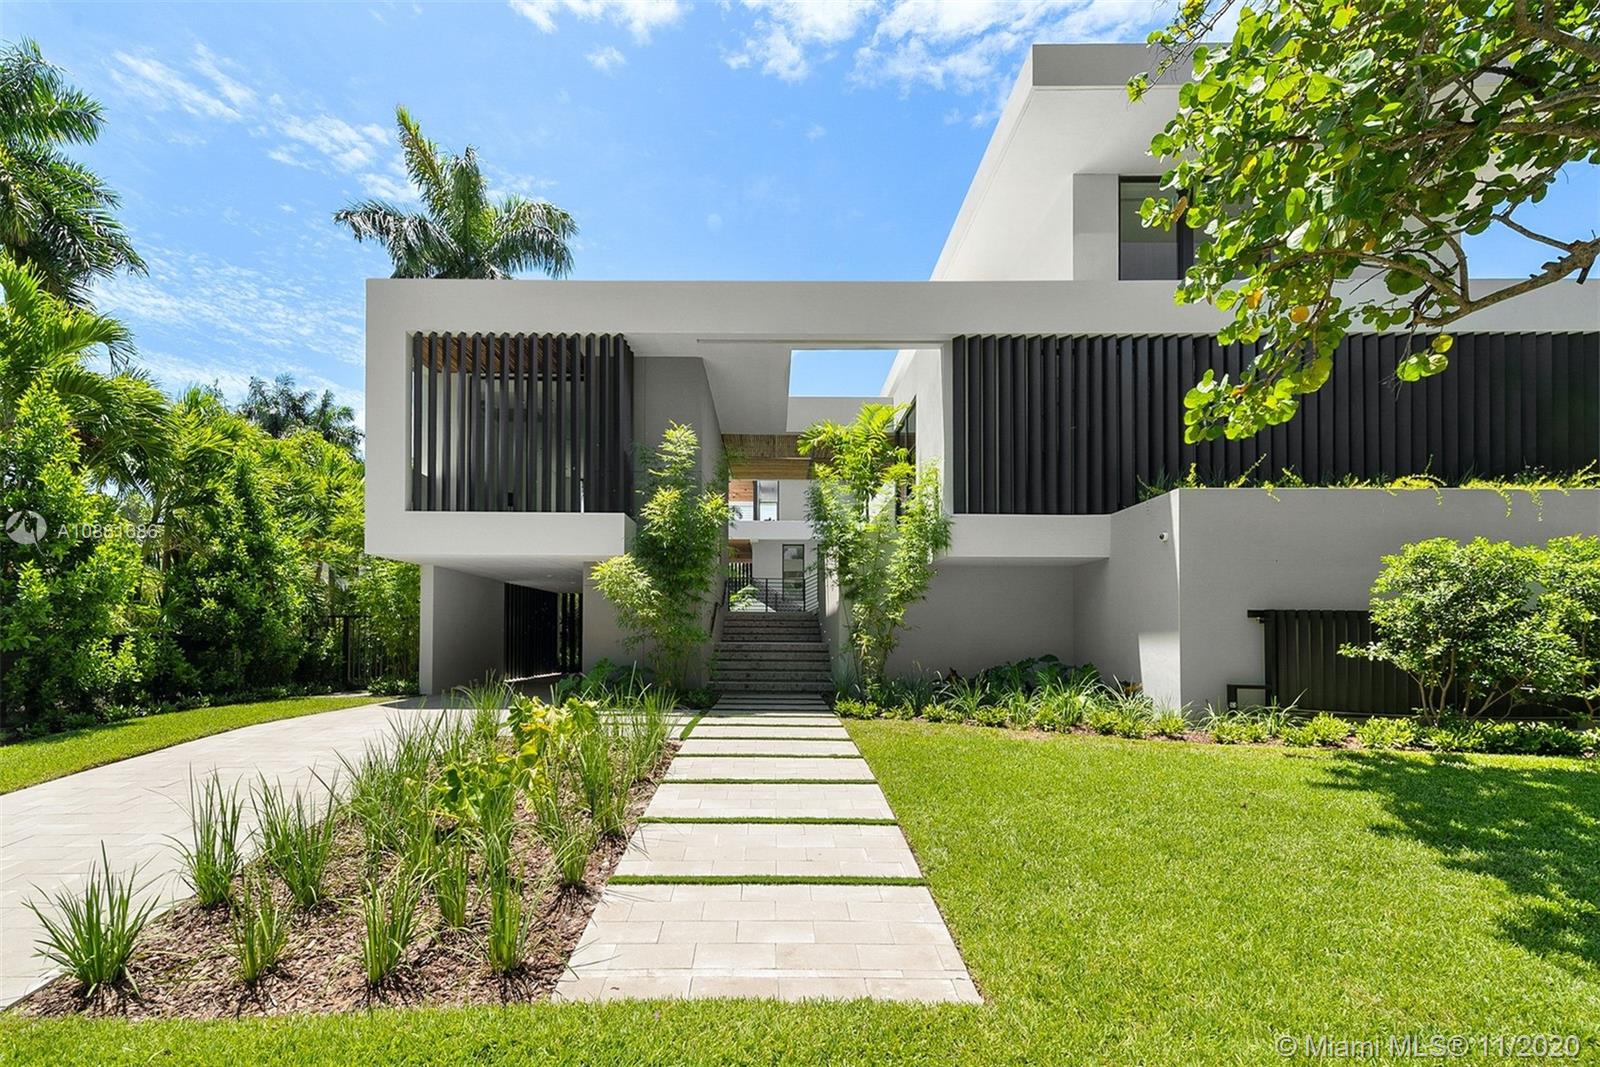 Brand new home on sought-after Entrada Estates gated community in Coconut Grove. Designed by Praxis' Jose Sanchez and built by ICH Builders, this modern Smart home is warm & elegant with clean lines and superb finishes. Boasting 7369 SF under air, the home features floor to ceiling windows that drape it in natural light, thoughtful floor plan, 250+ glass wine room, elevator, additional large room ideal as a media room/man cave/office, second family room on the top floor, 5 carports & plenty of storage. Gourmet kitchen w/ top of the line appliances, ample pantry & gorgeous countertops and Mia Cucina cabinets. Expansive grounds perfect for entertaining w/ summer kitchen & covered spaces for large gatherings. The multi-depth heated double pool allows for swimming & leisure activities.